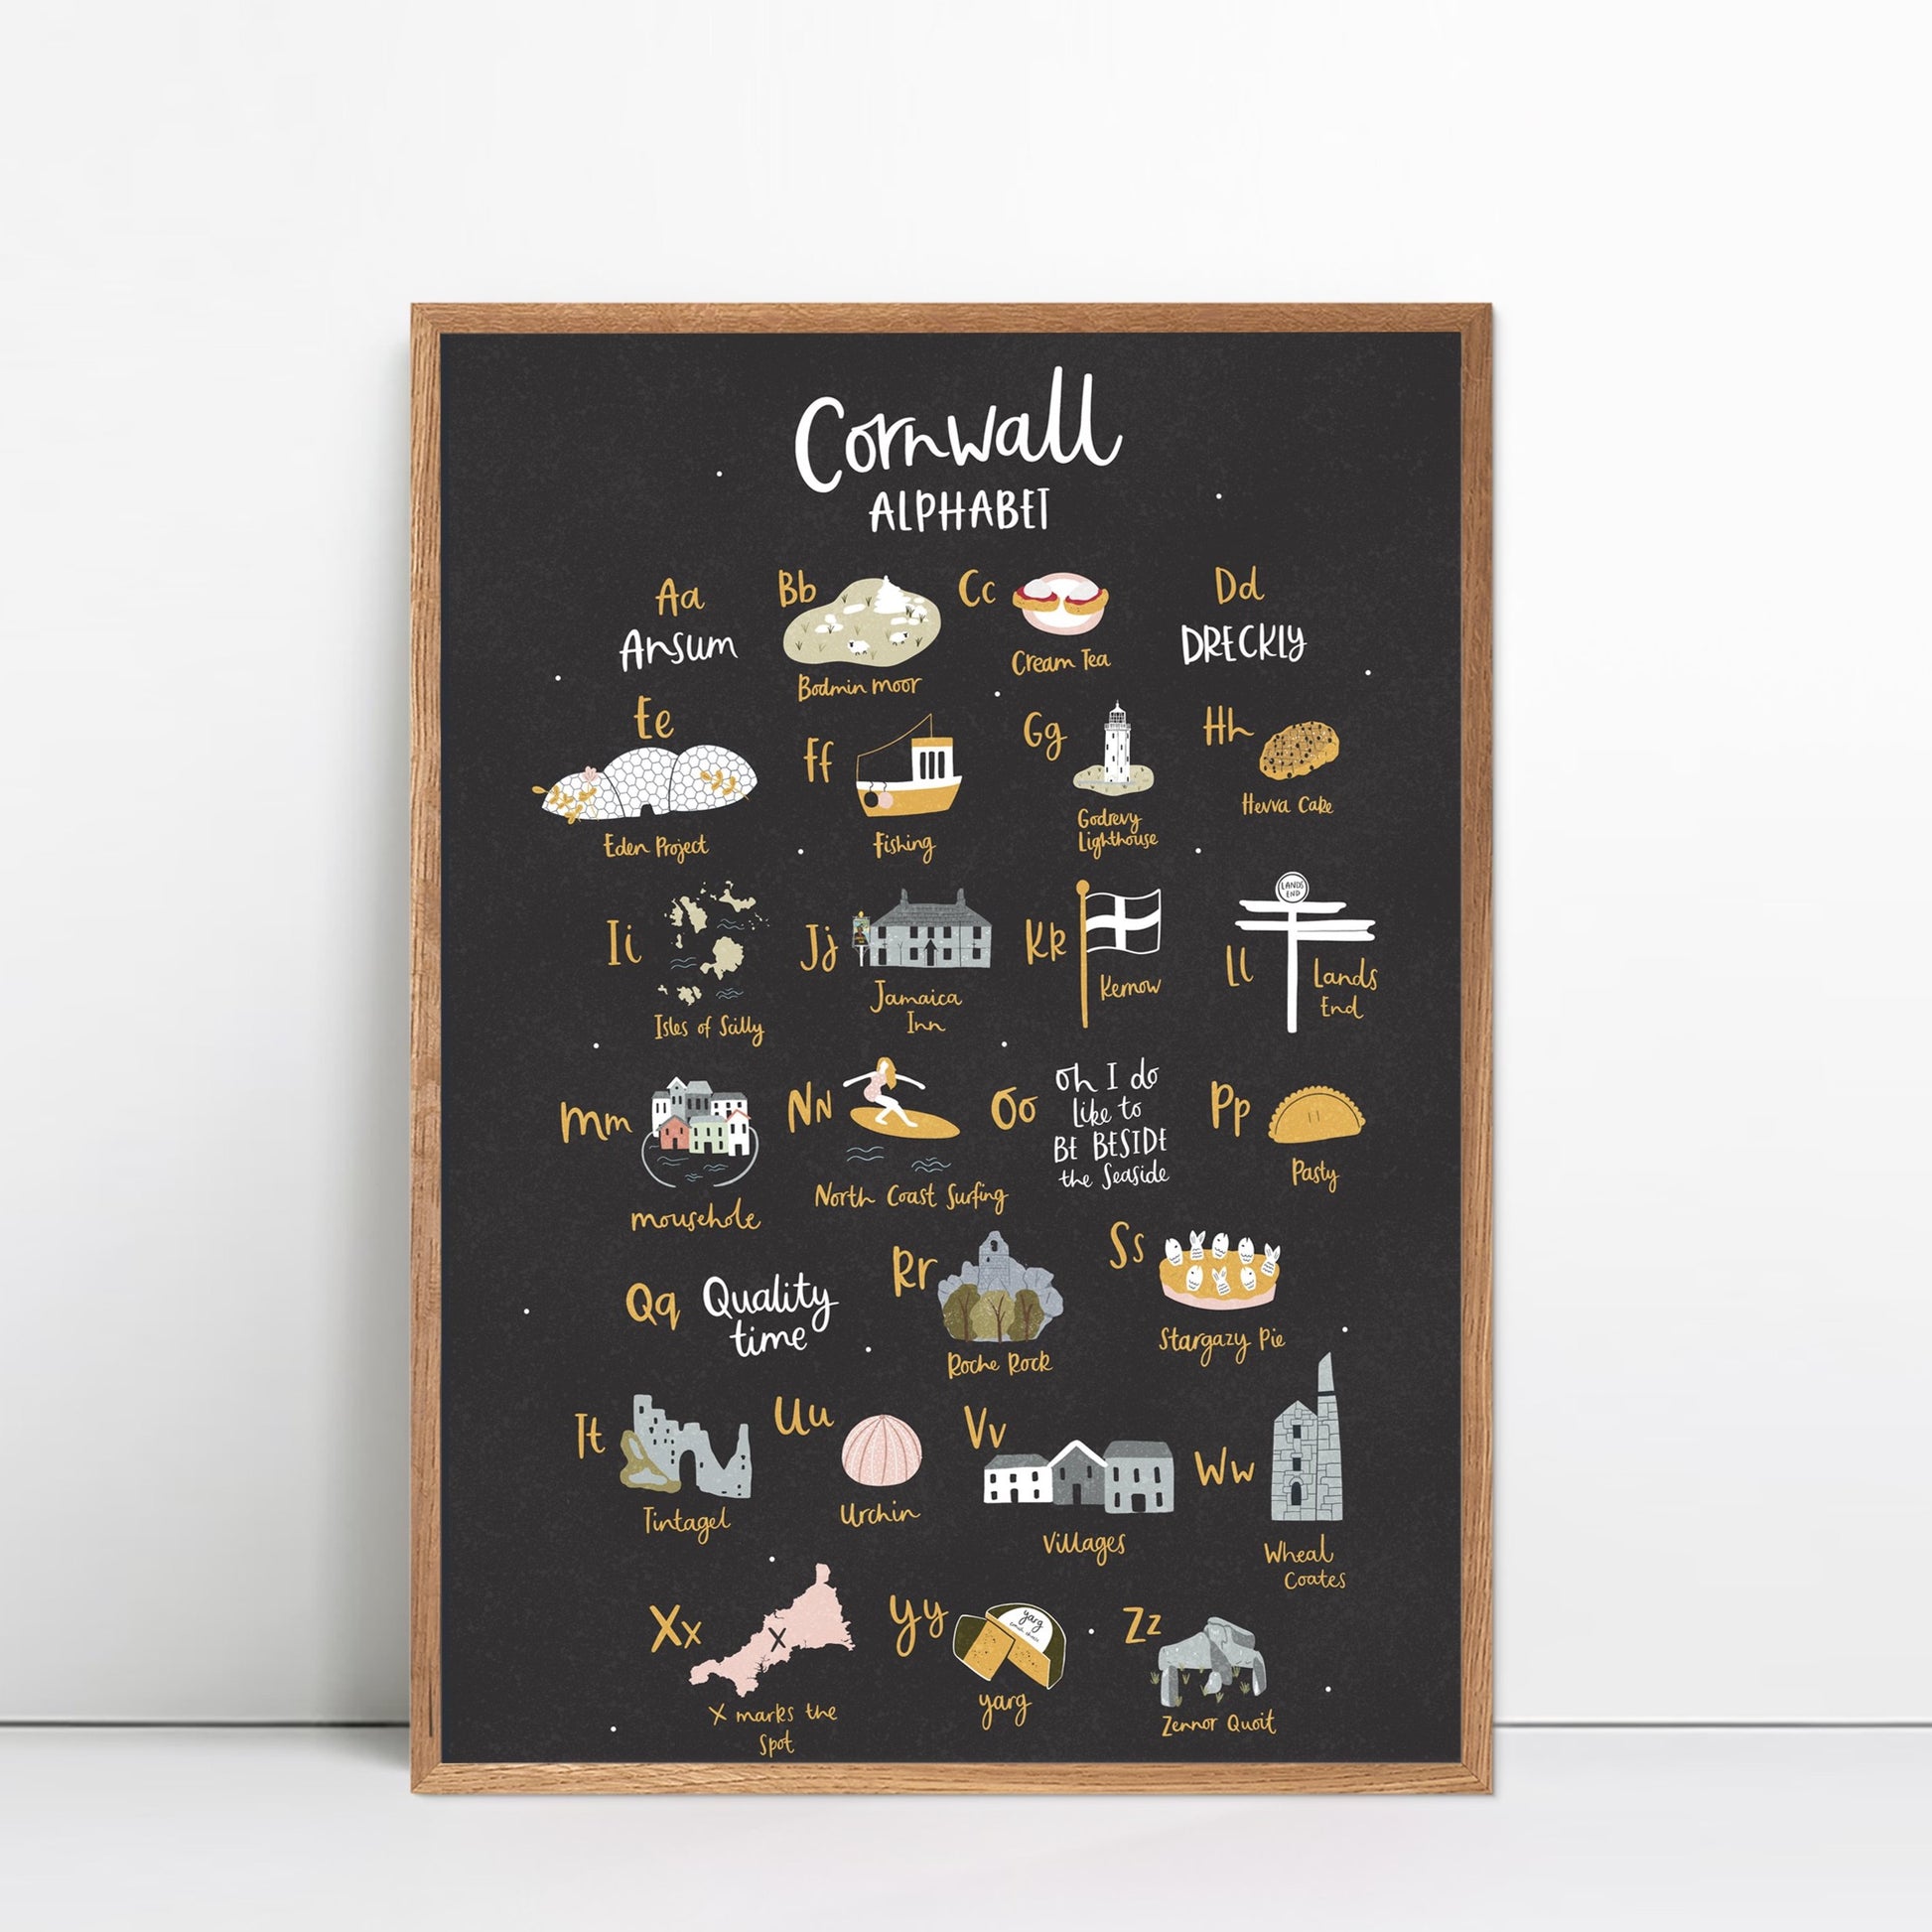 Cornwall alphabet print by Abbie Imagine. Featuring illustrations from A-z of famous things to do with Cornwall, such as a pasty and a cream tea!